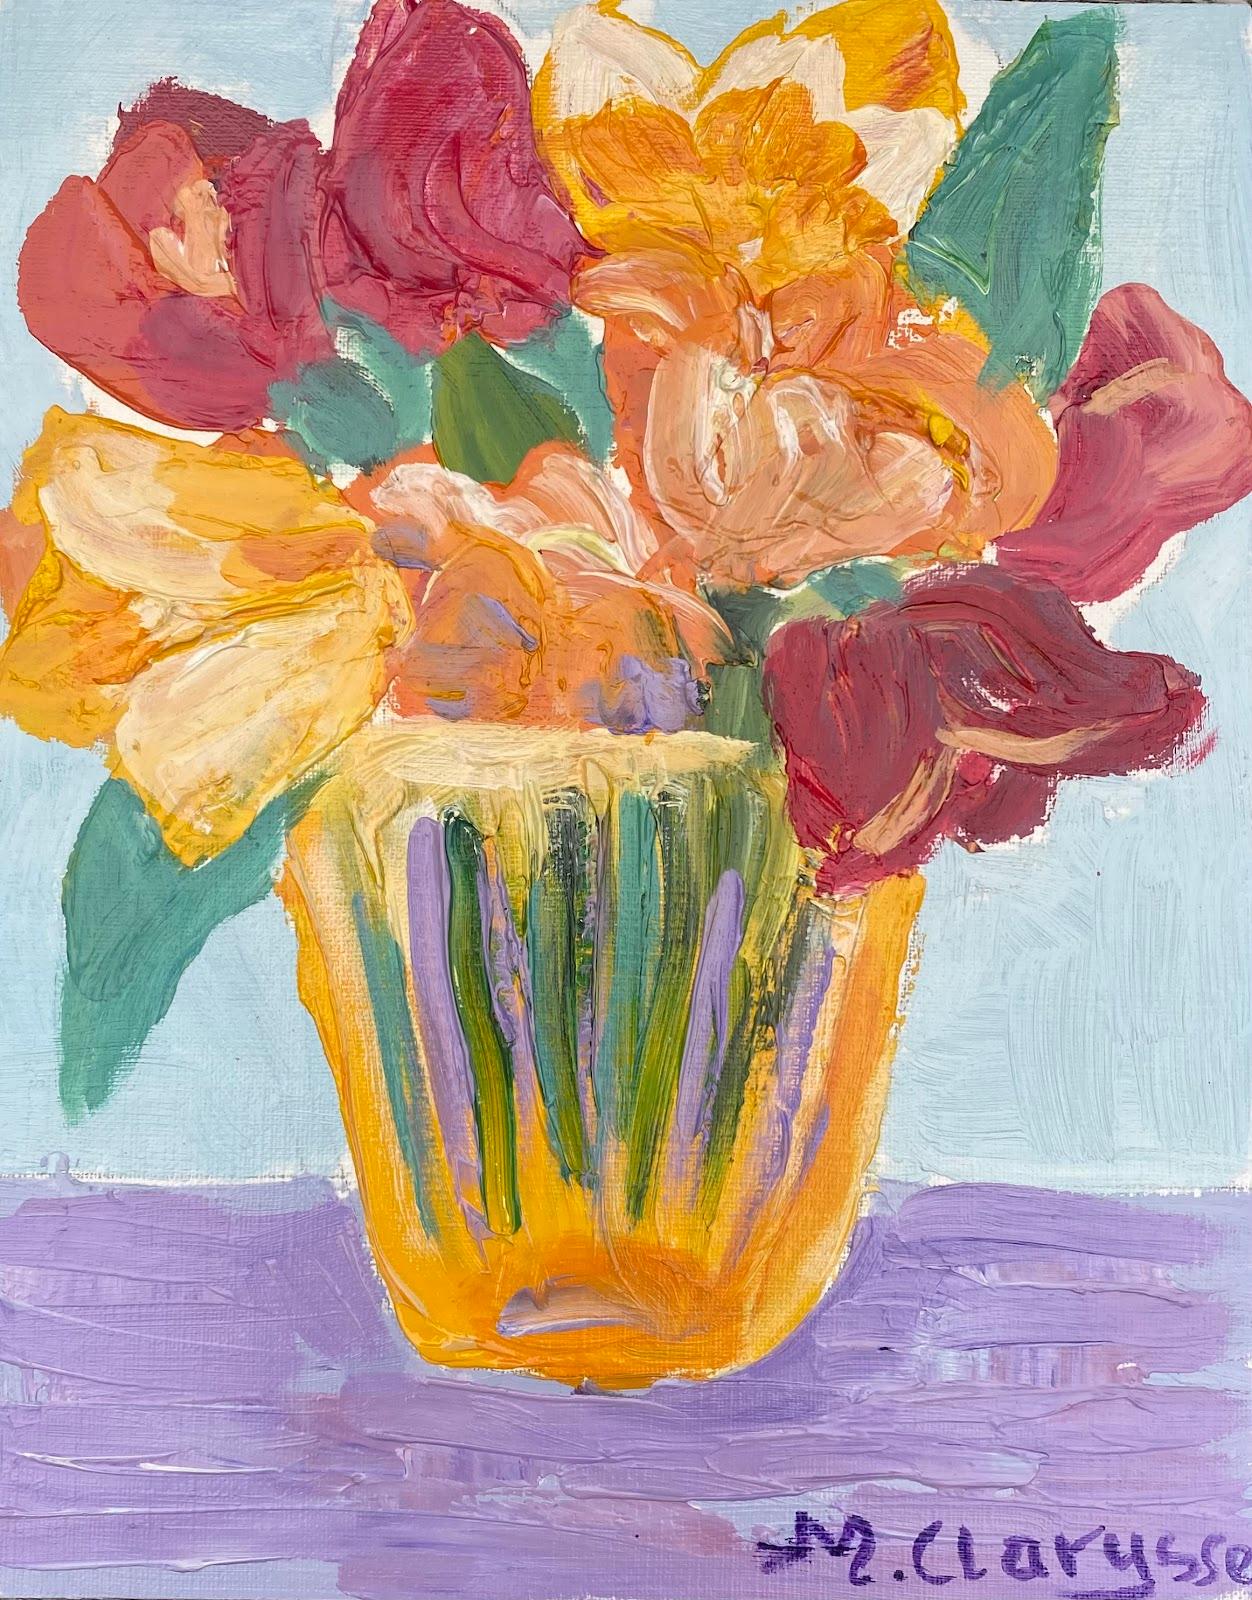 Maggy Clarysse Abstract Painting - Colorful French Impressionist Oil Painting Red and Orange Flowers in a Vase